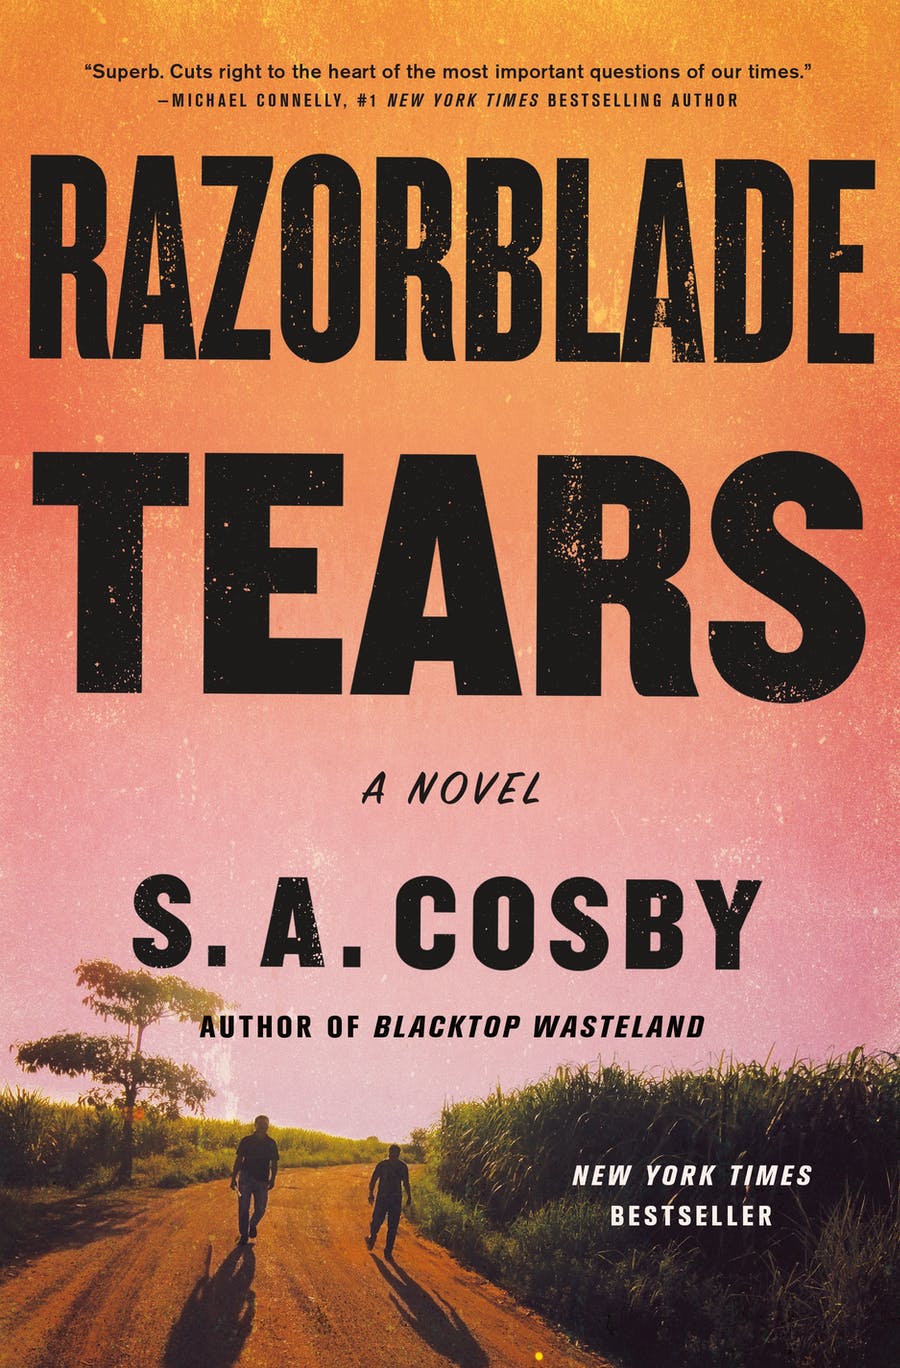 Book Cover for Razorblade Tears, two people walking on a road into an orange sunrise.